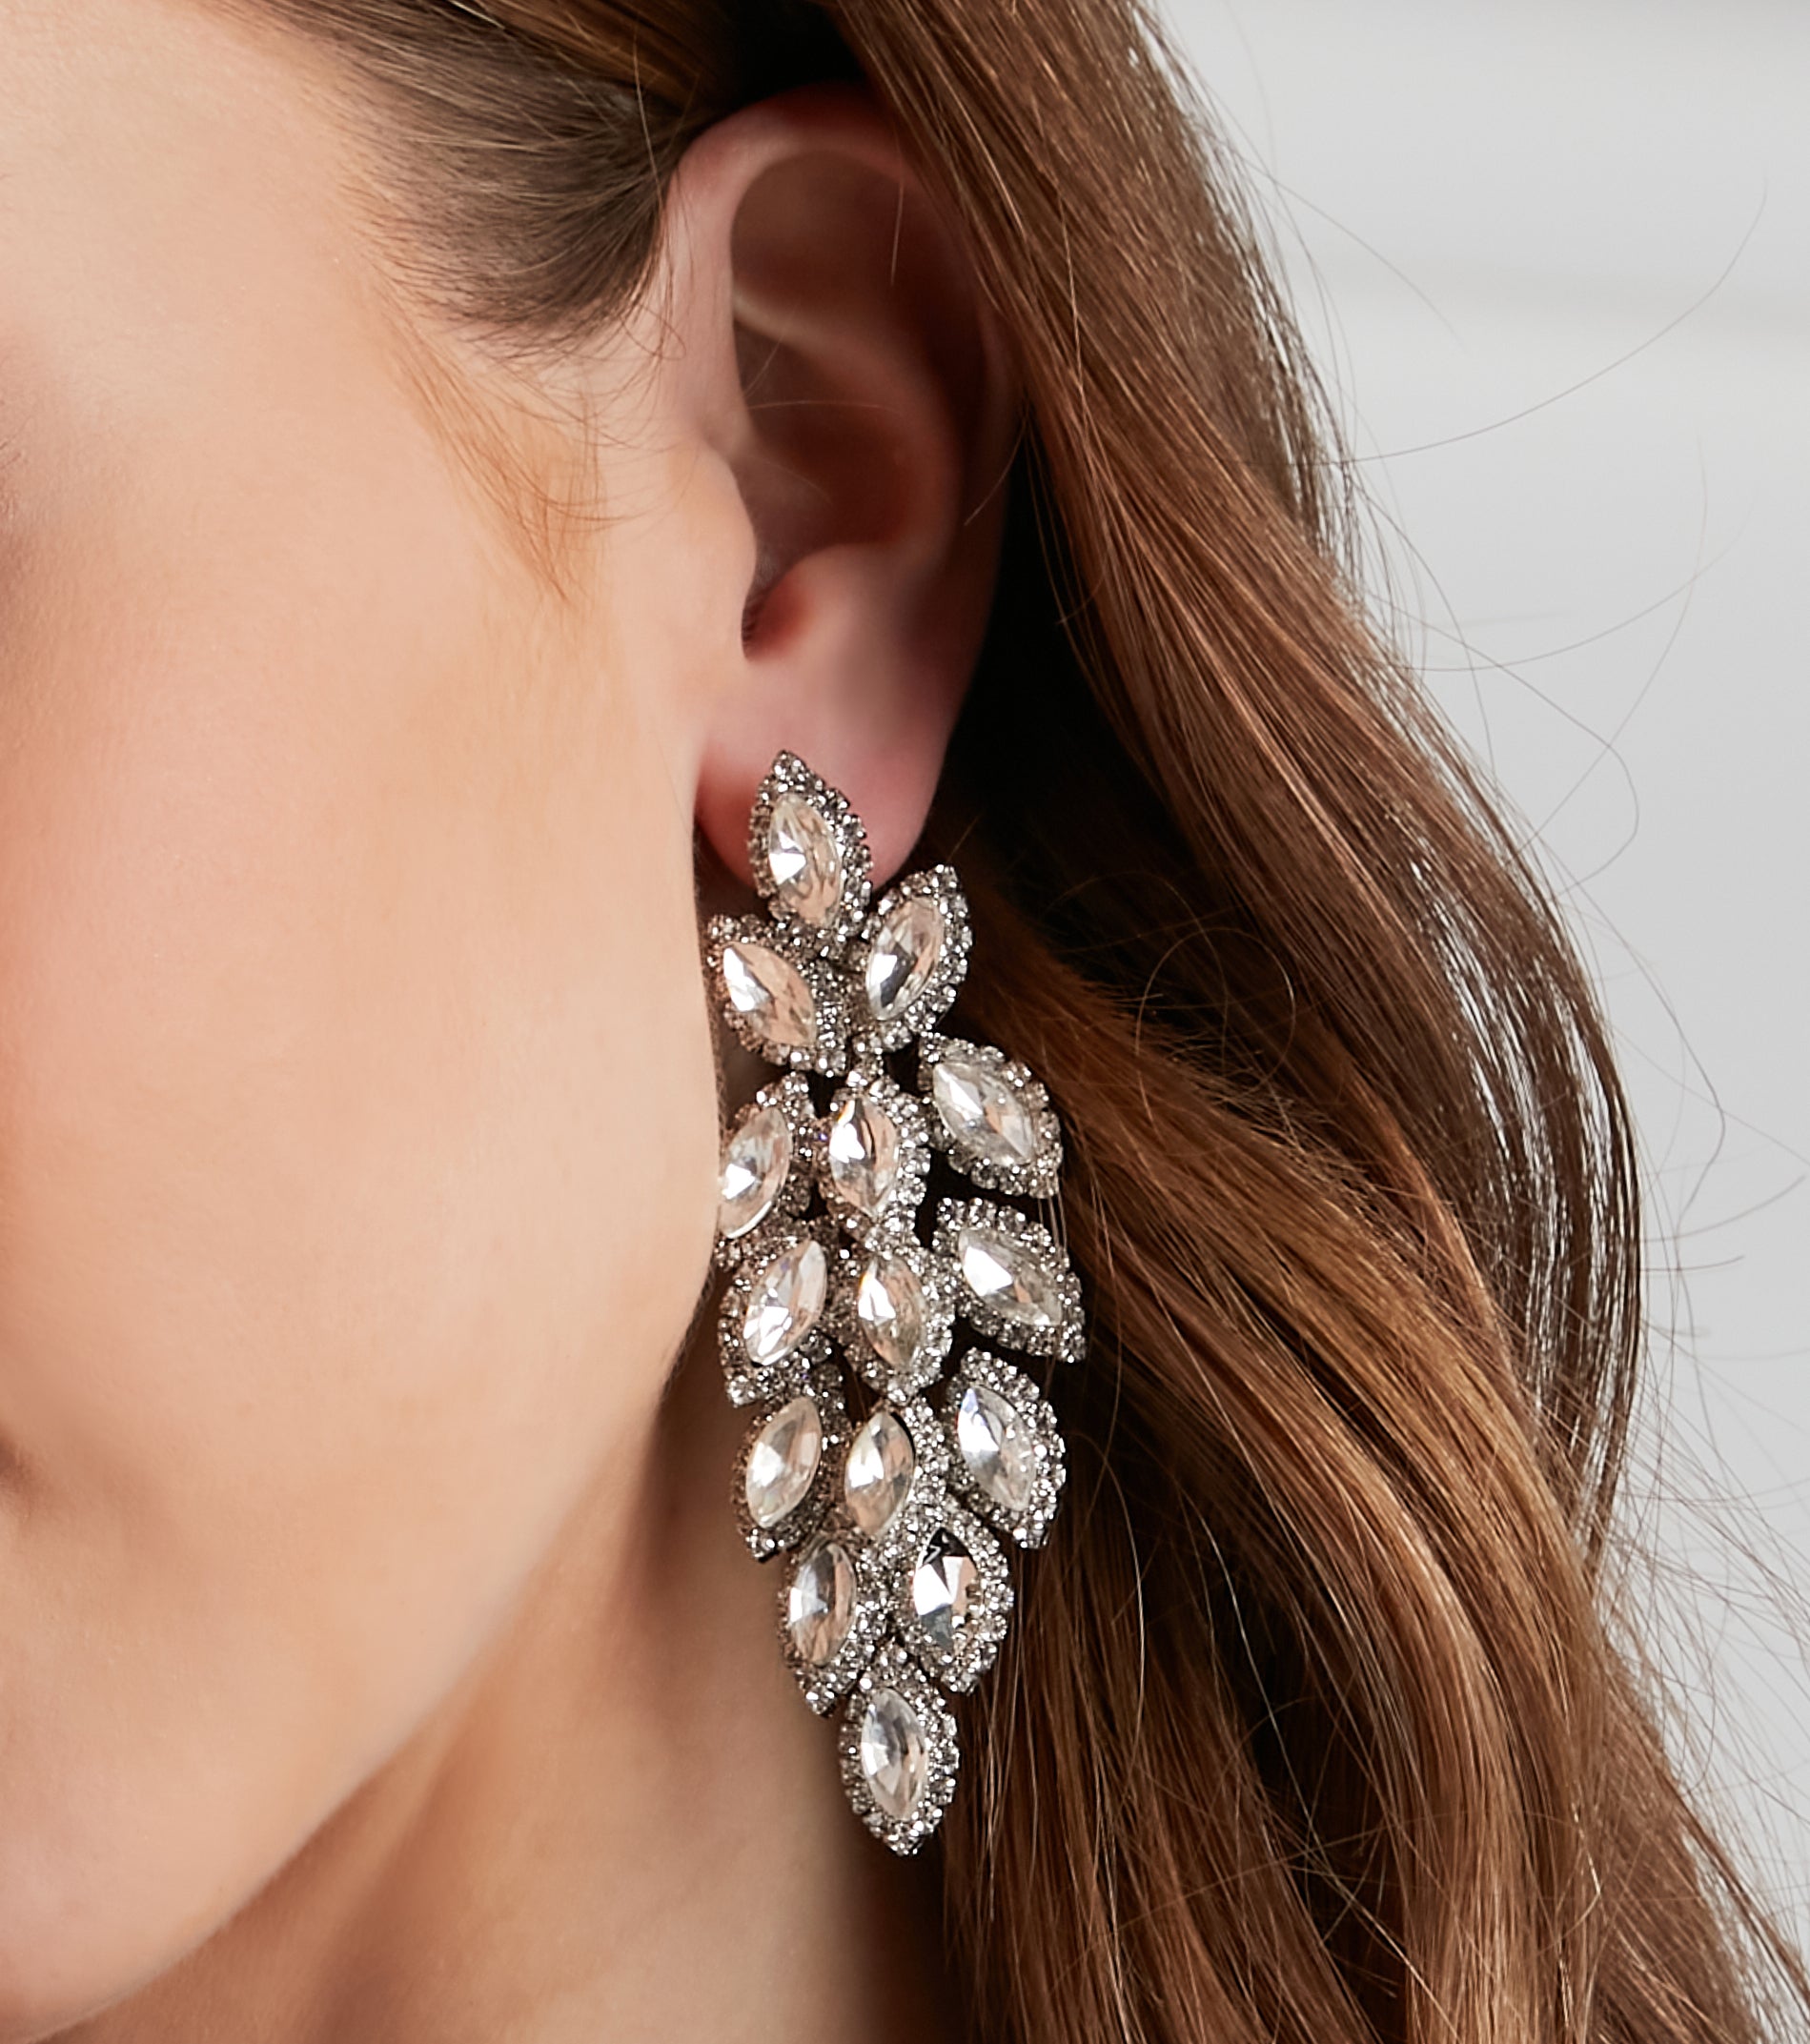 Bring The Drama Statement Earrings